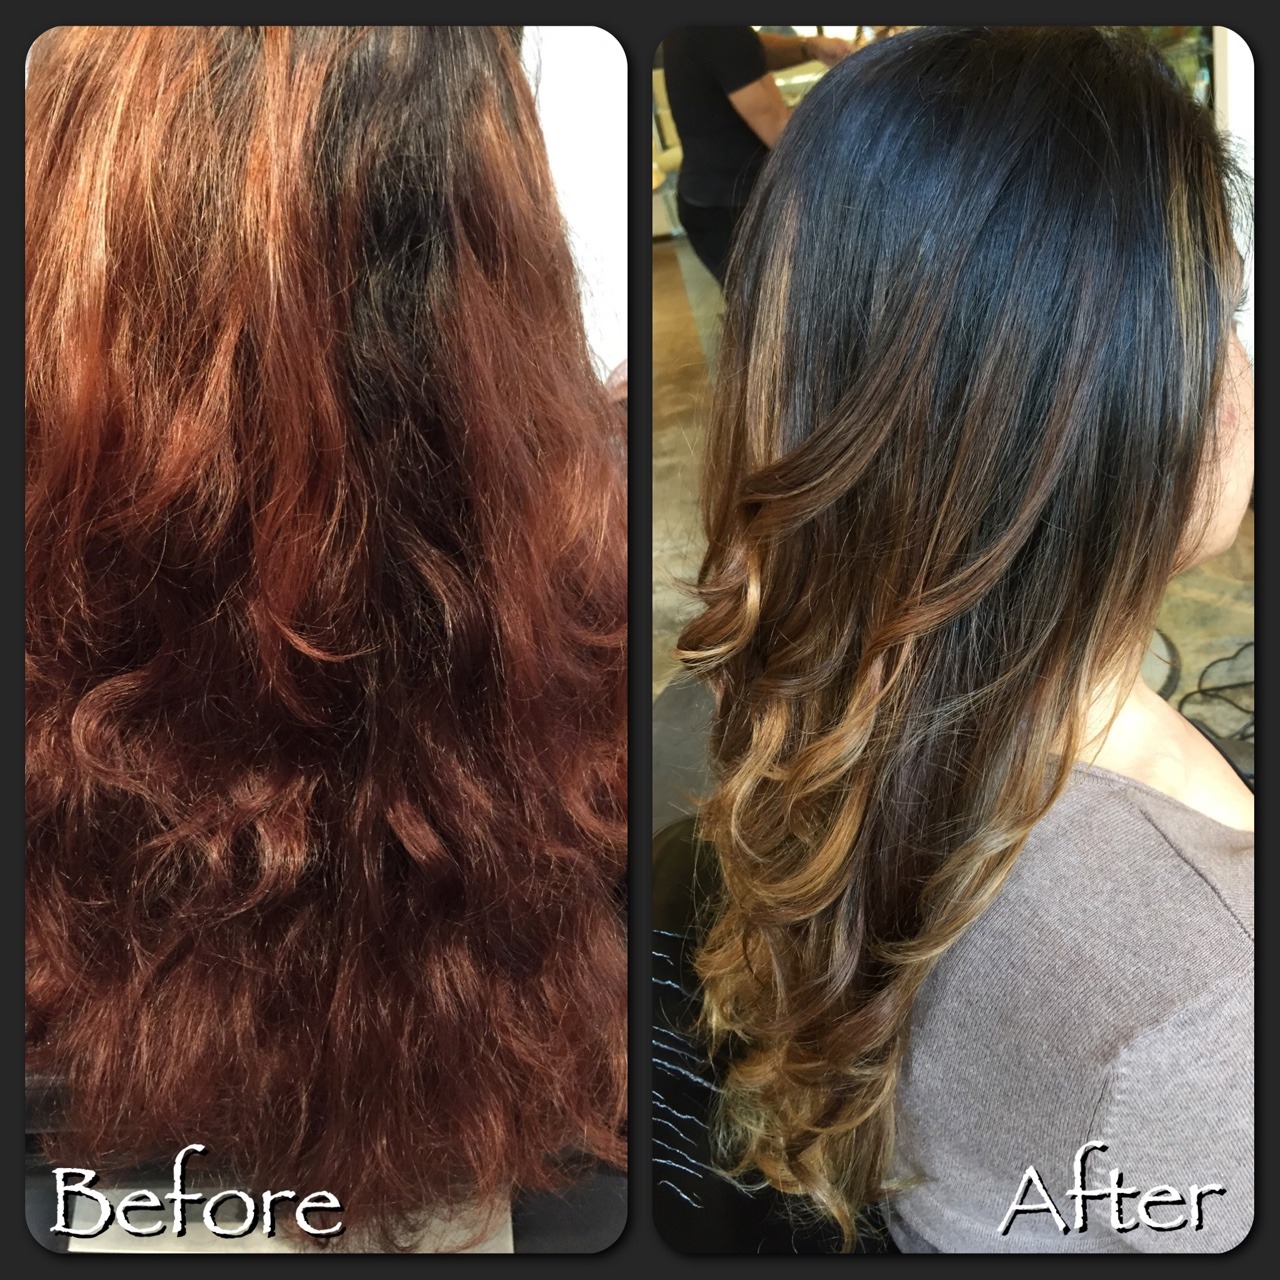 Hair by Rachel Dillon — Brassy brown to a dramatic Balayage highlight